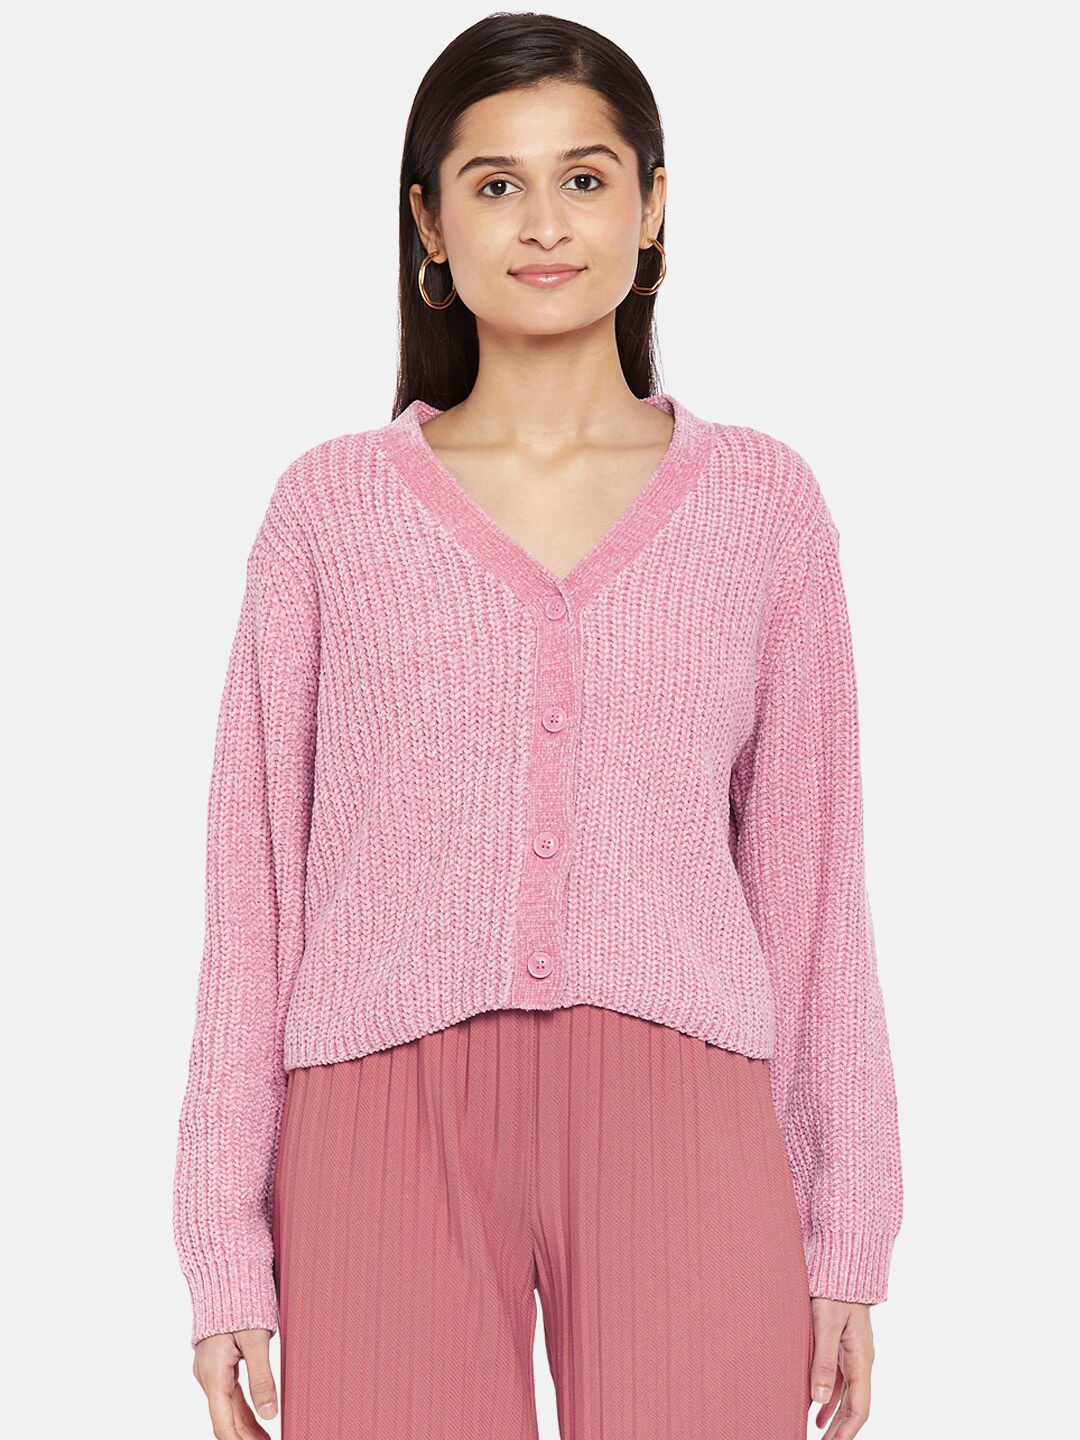 Honey by Pantaloons Women Pink Ribbed Cardigan Price in India